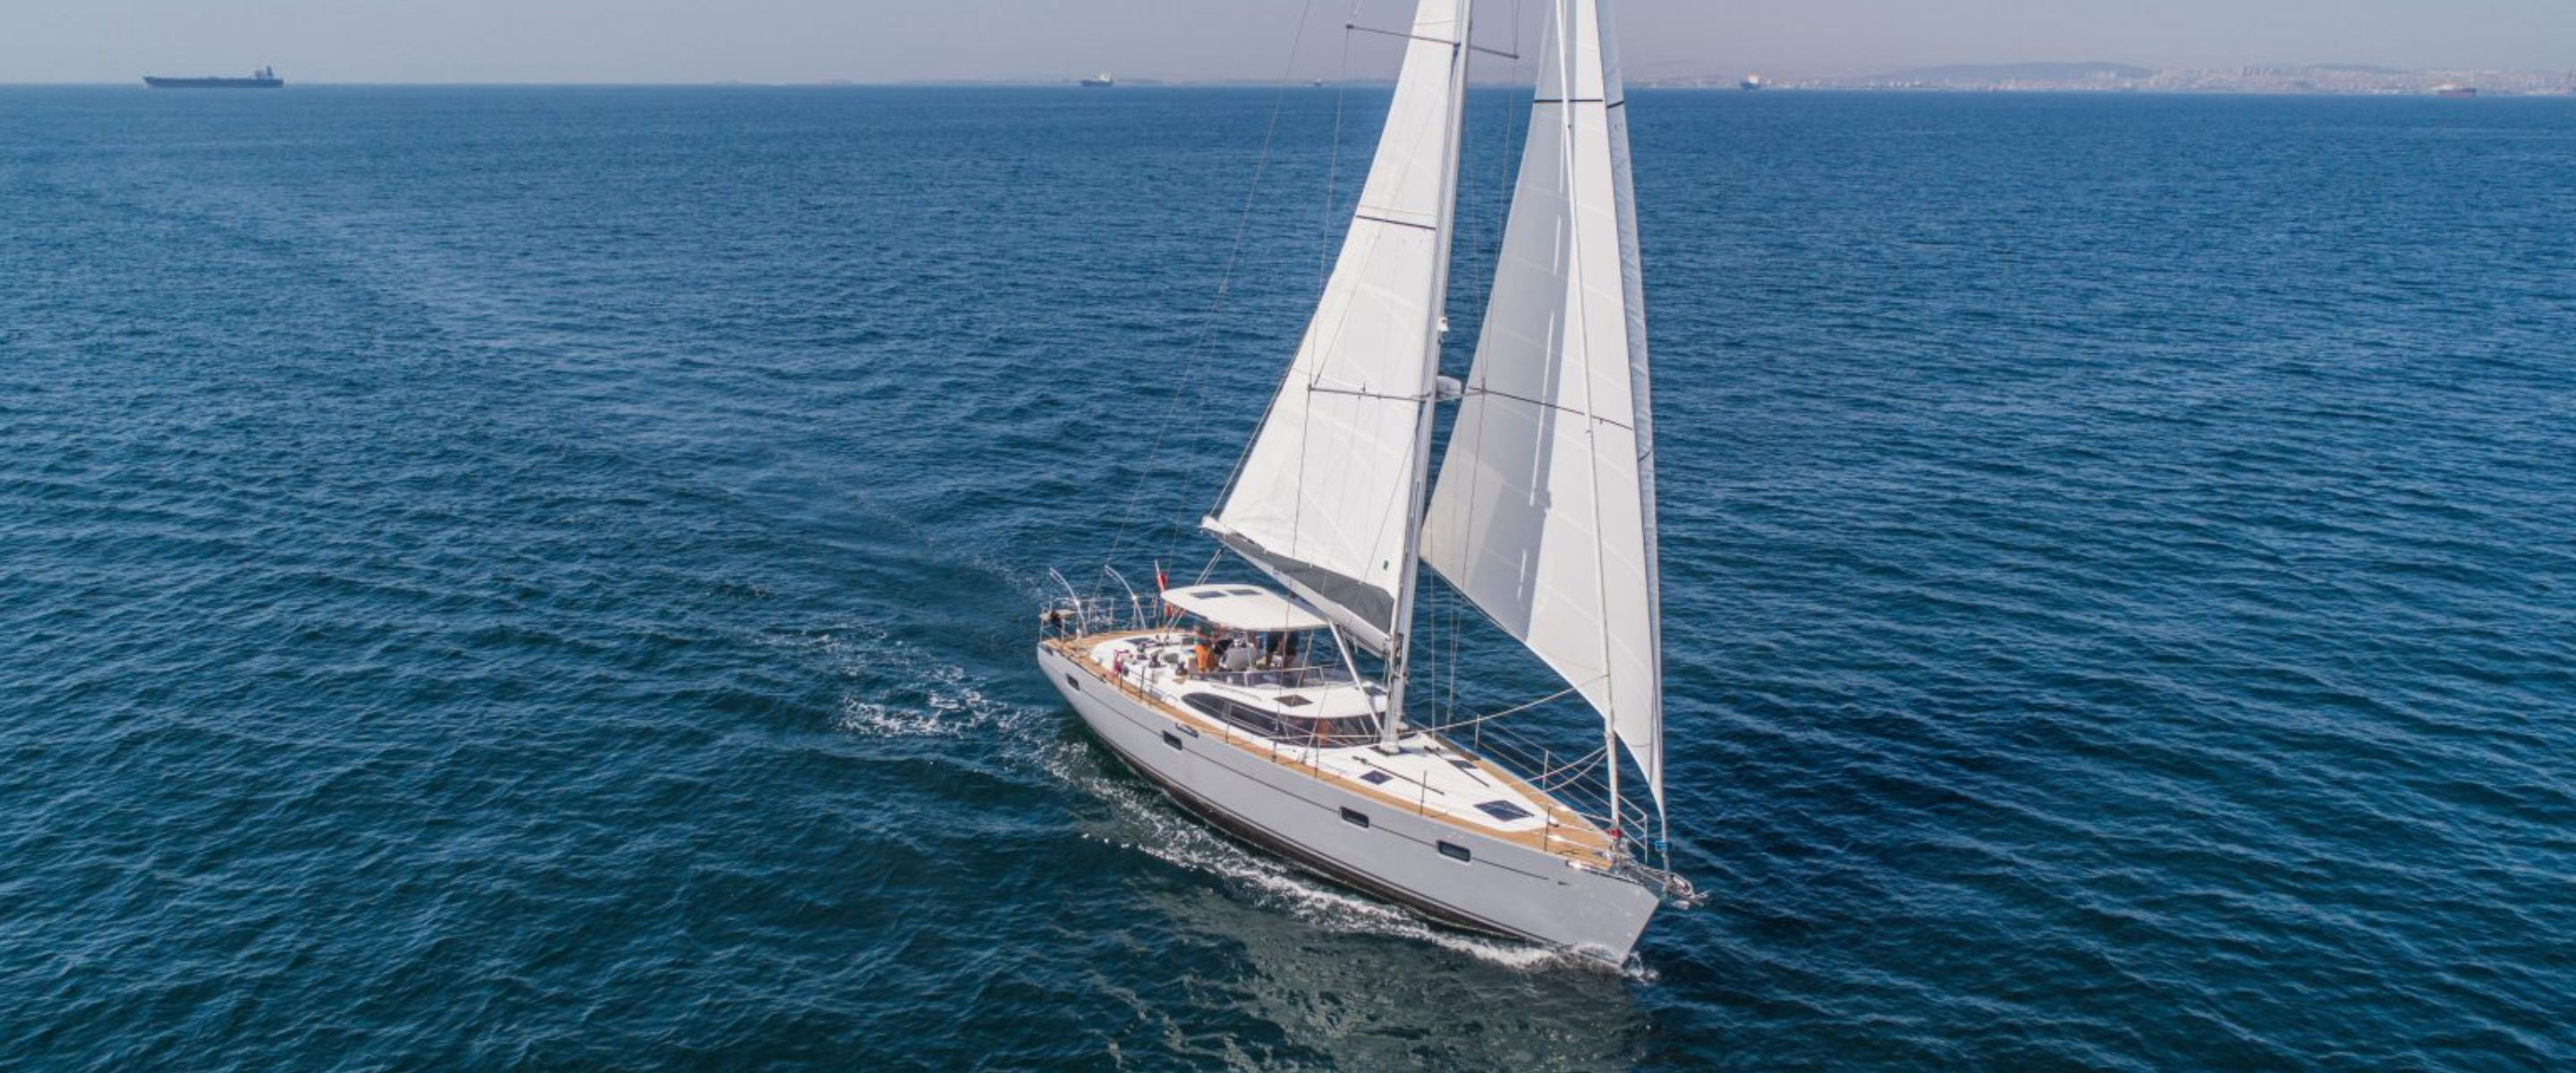 Kraken Yachts fitted with Flexiteek - What our customers say